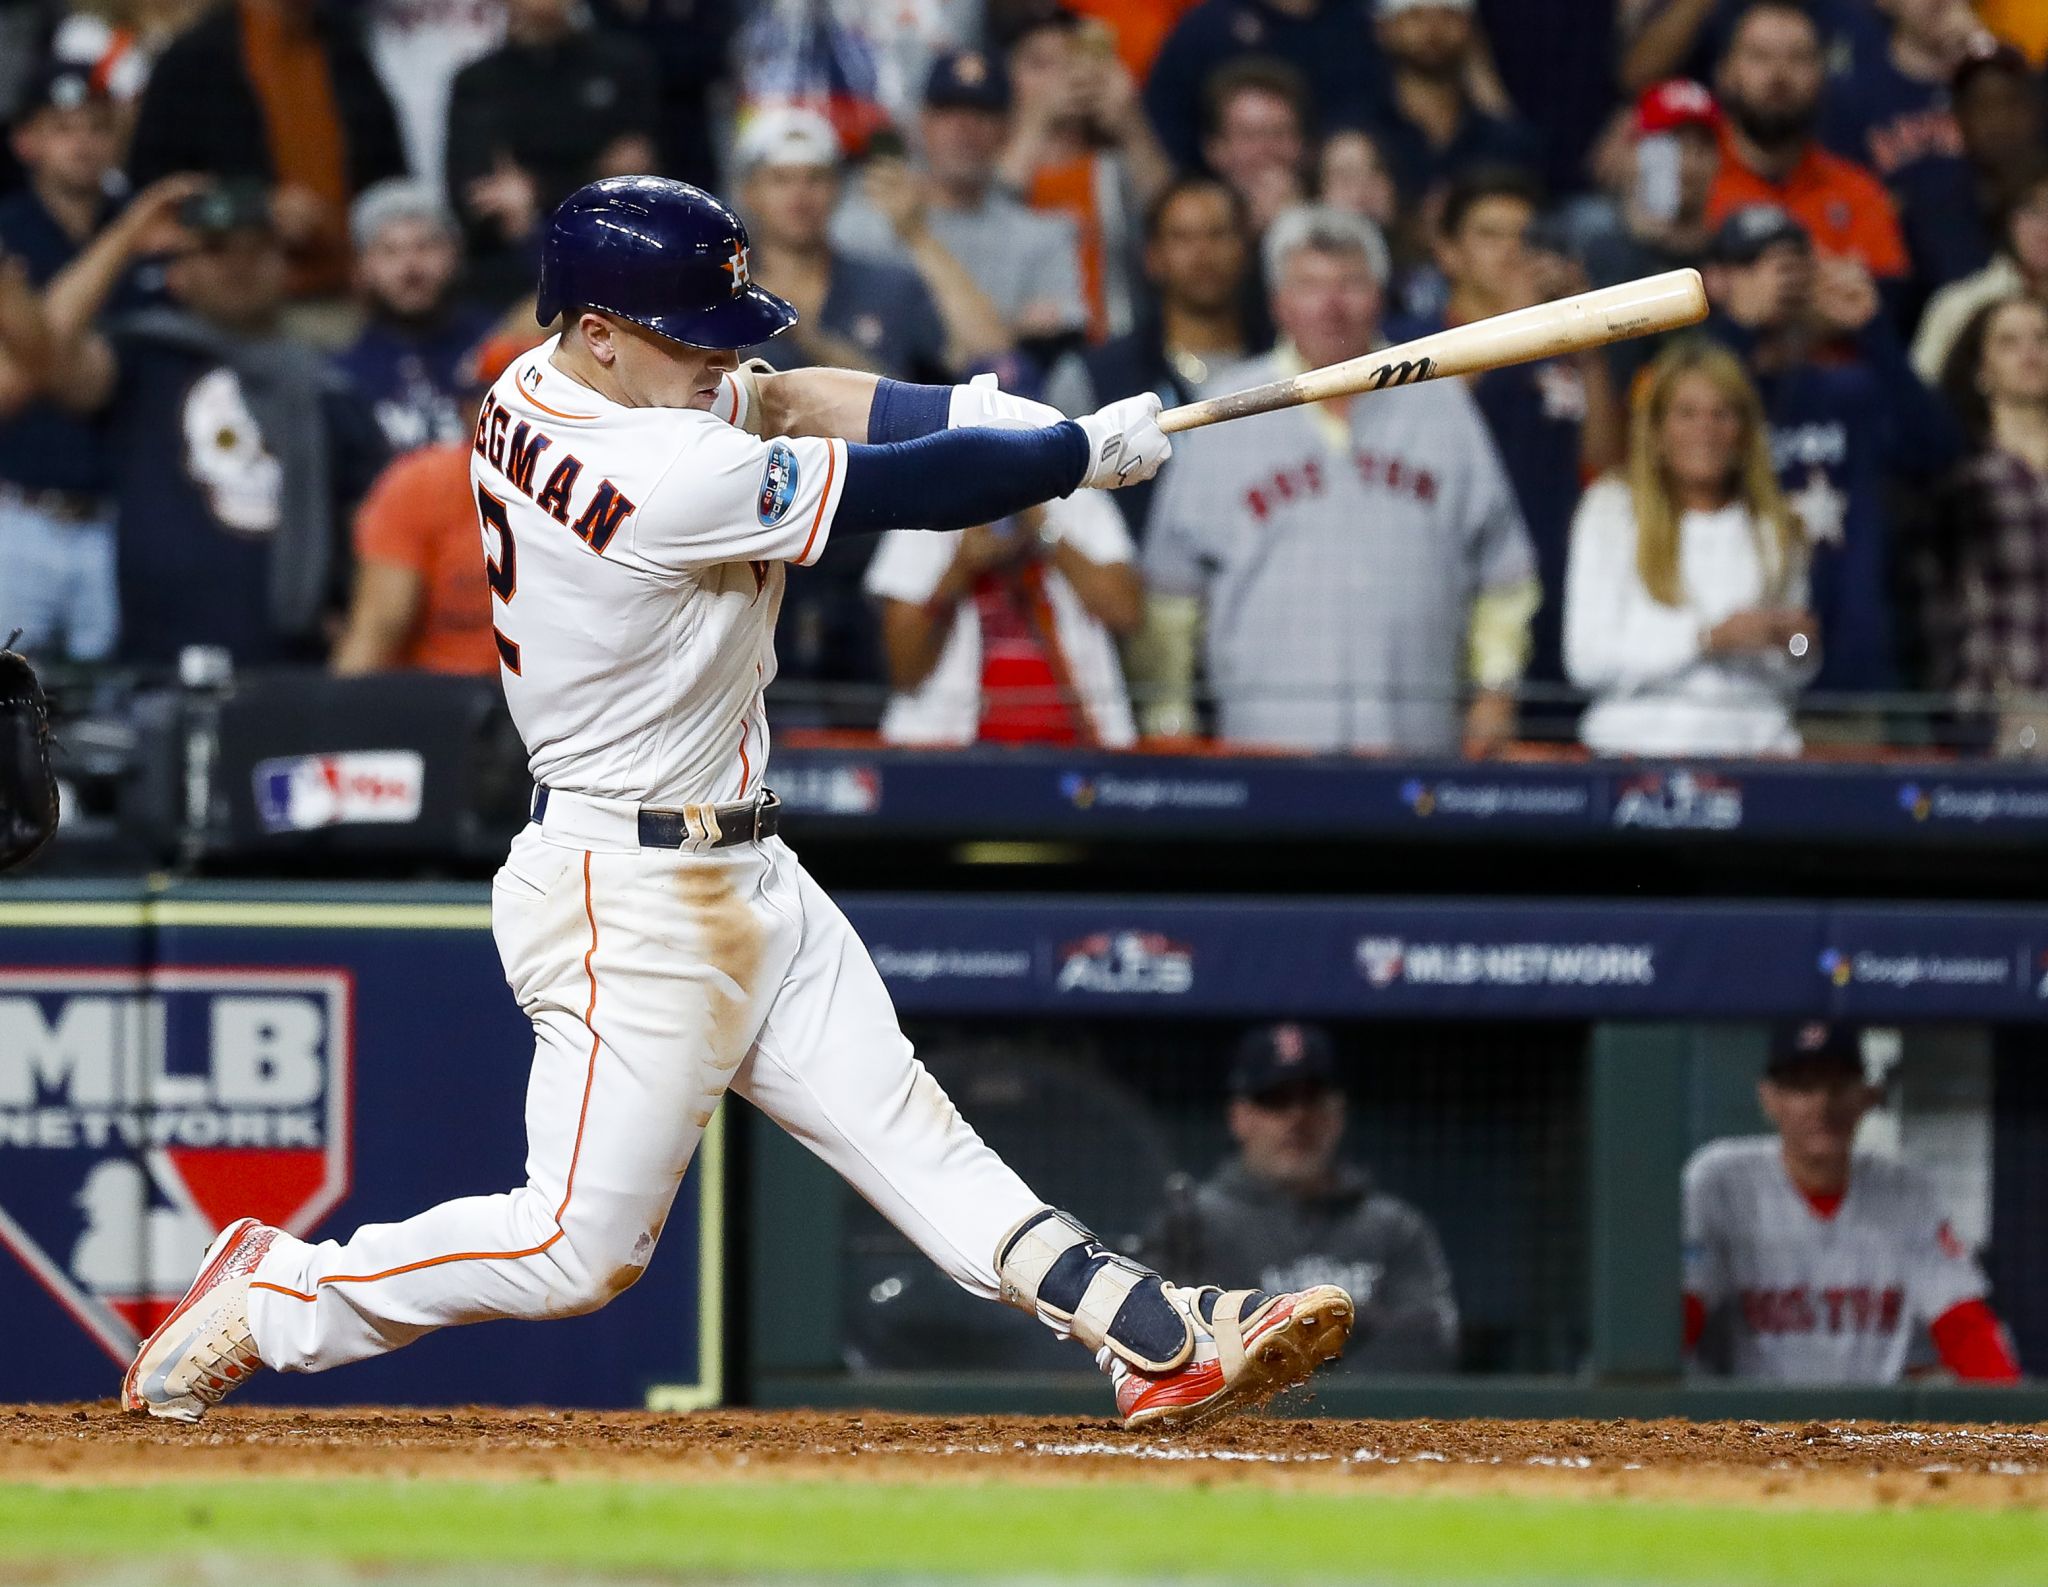 Evaluating the Marwin González signing so far this season